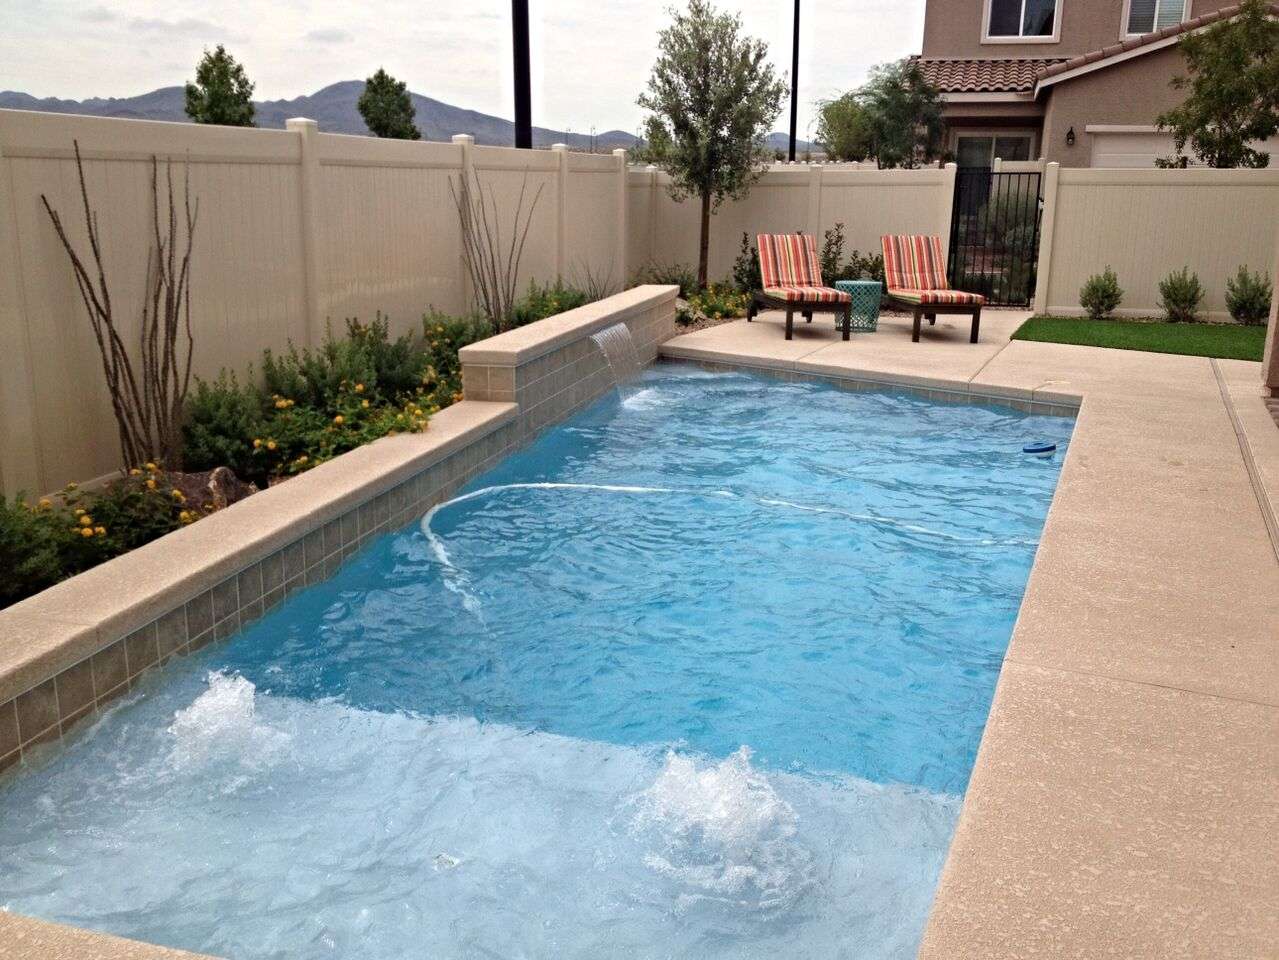 Why you should Consider Building an Inground Gunite Pool